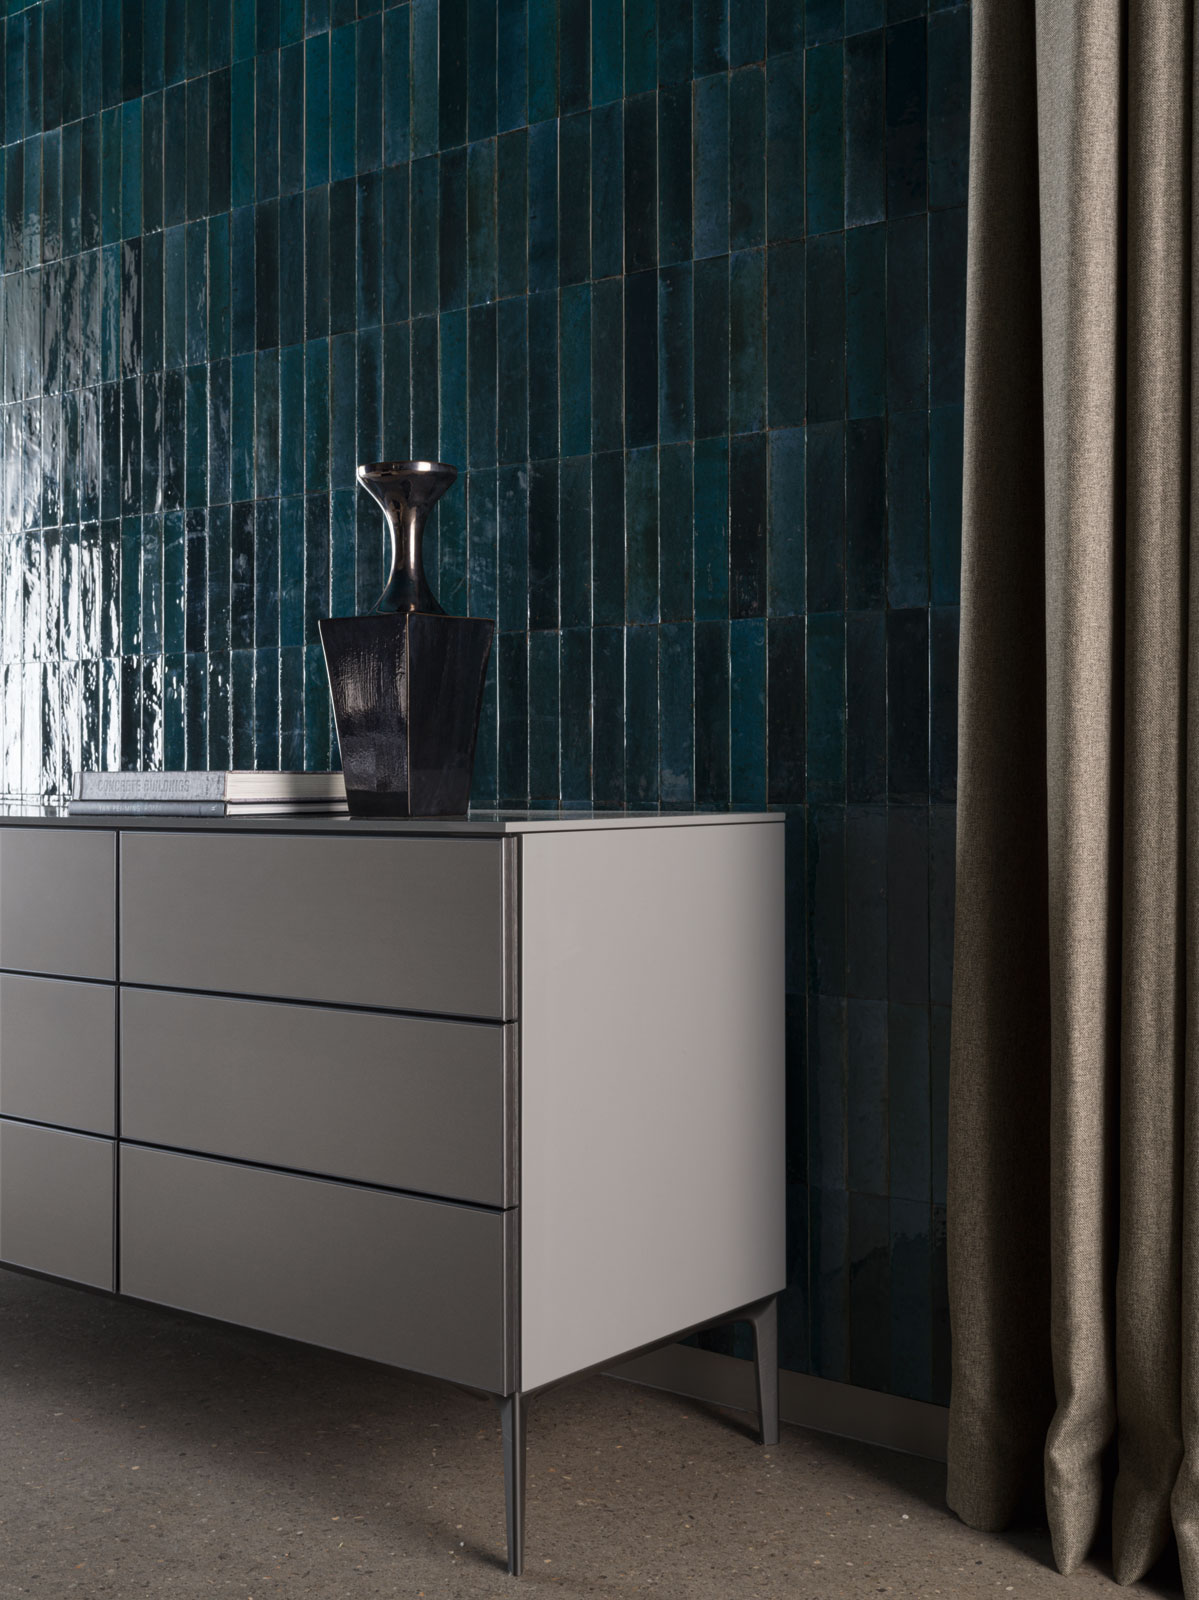 505 UP sideboard designed by Nicola Gallizia -<br>Pictured: Mottura S.p.A curtain system